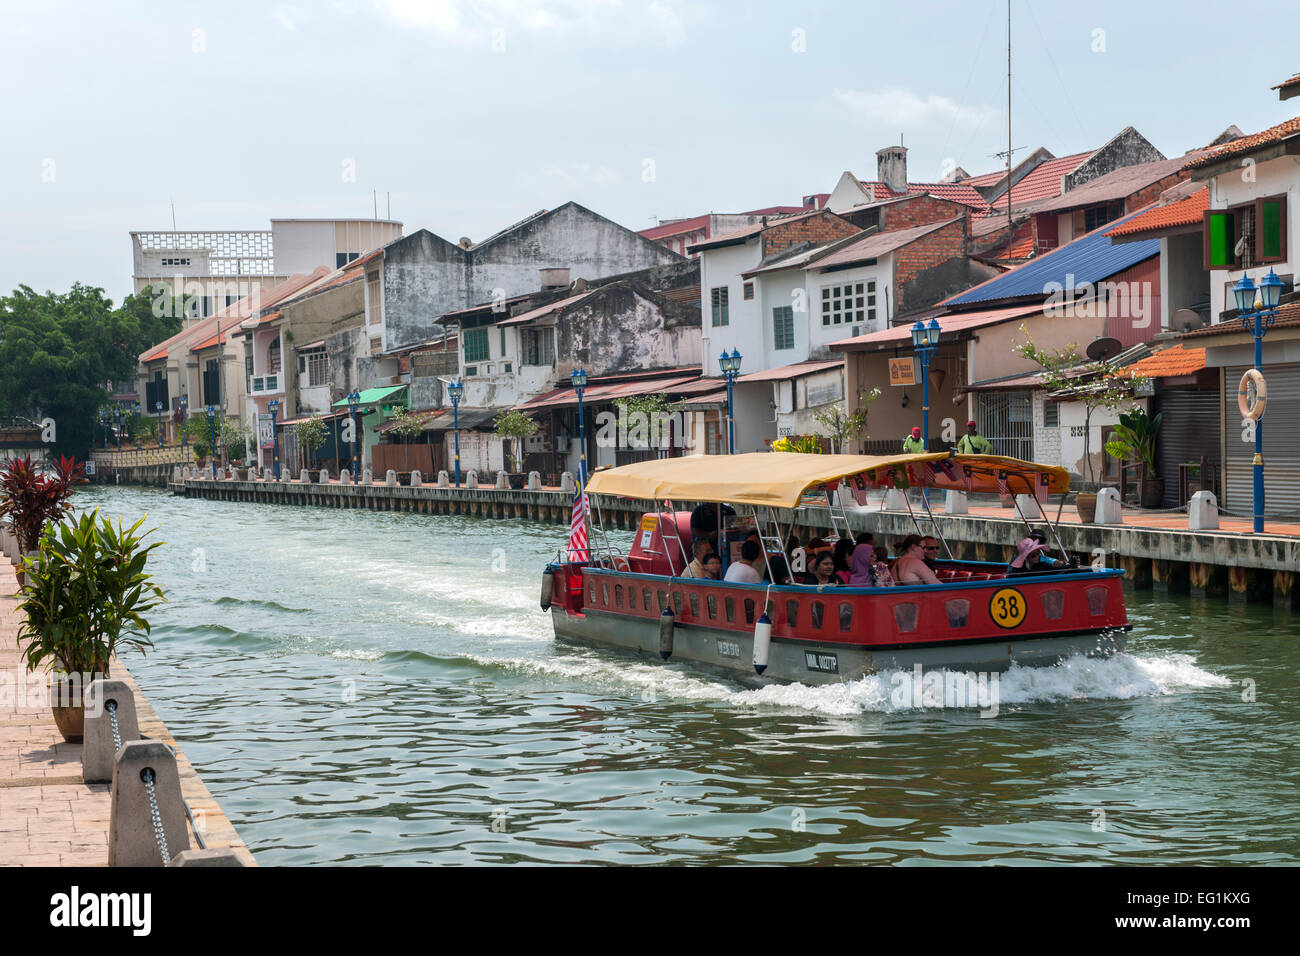 A boat on the Malacca River which flows through Malacca town, Malaysia. Stock Photo